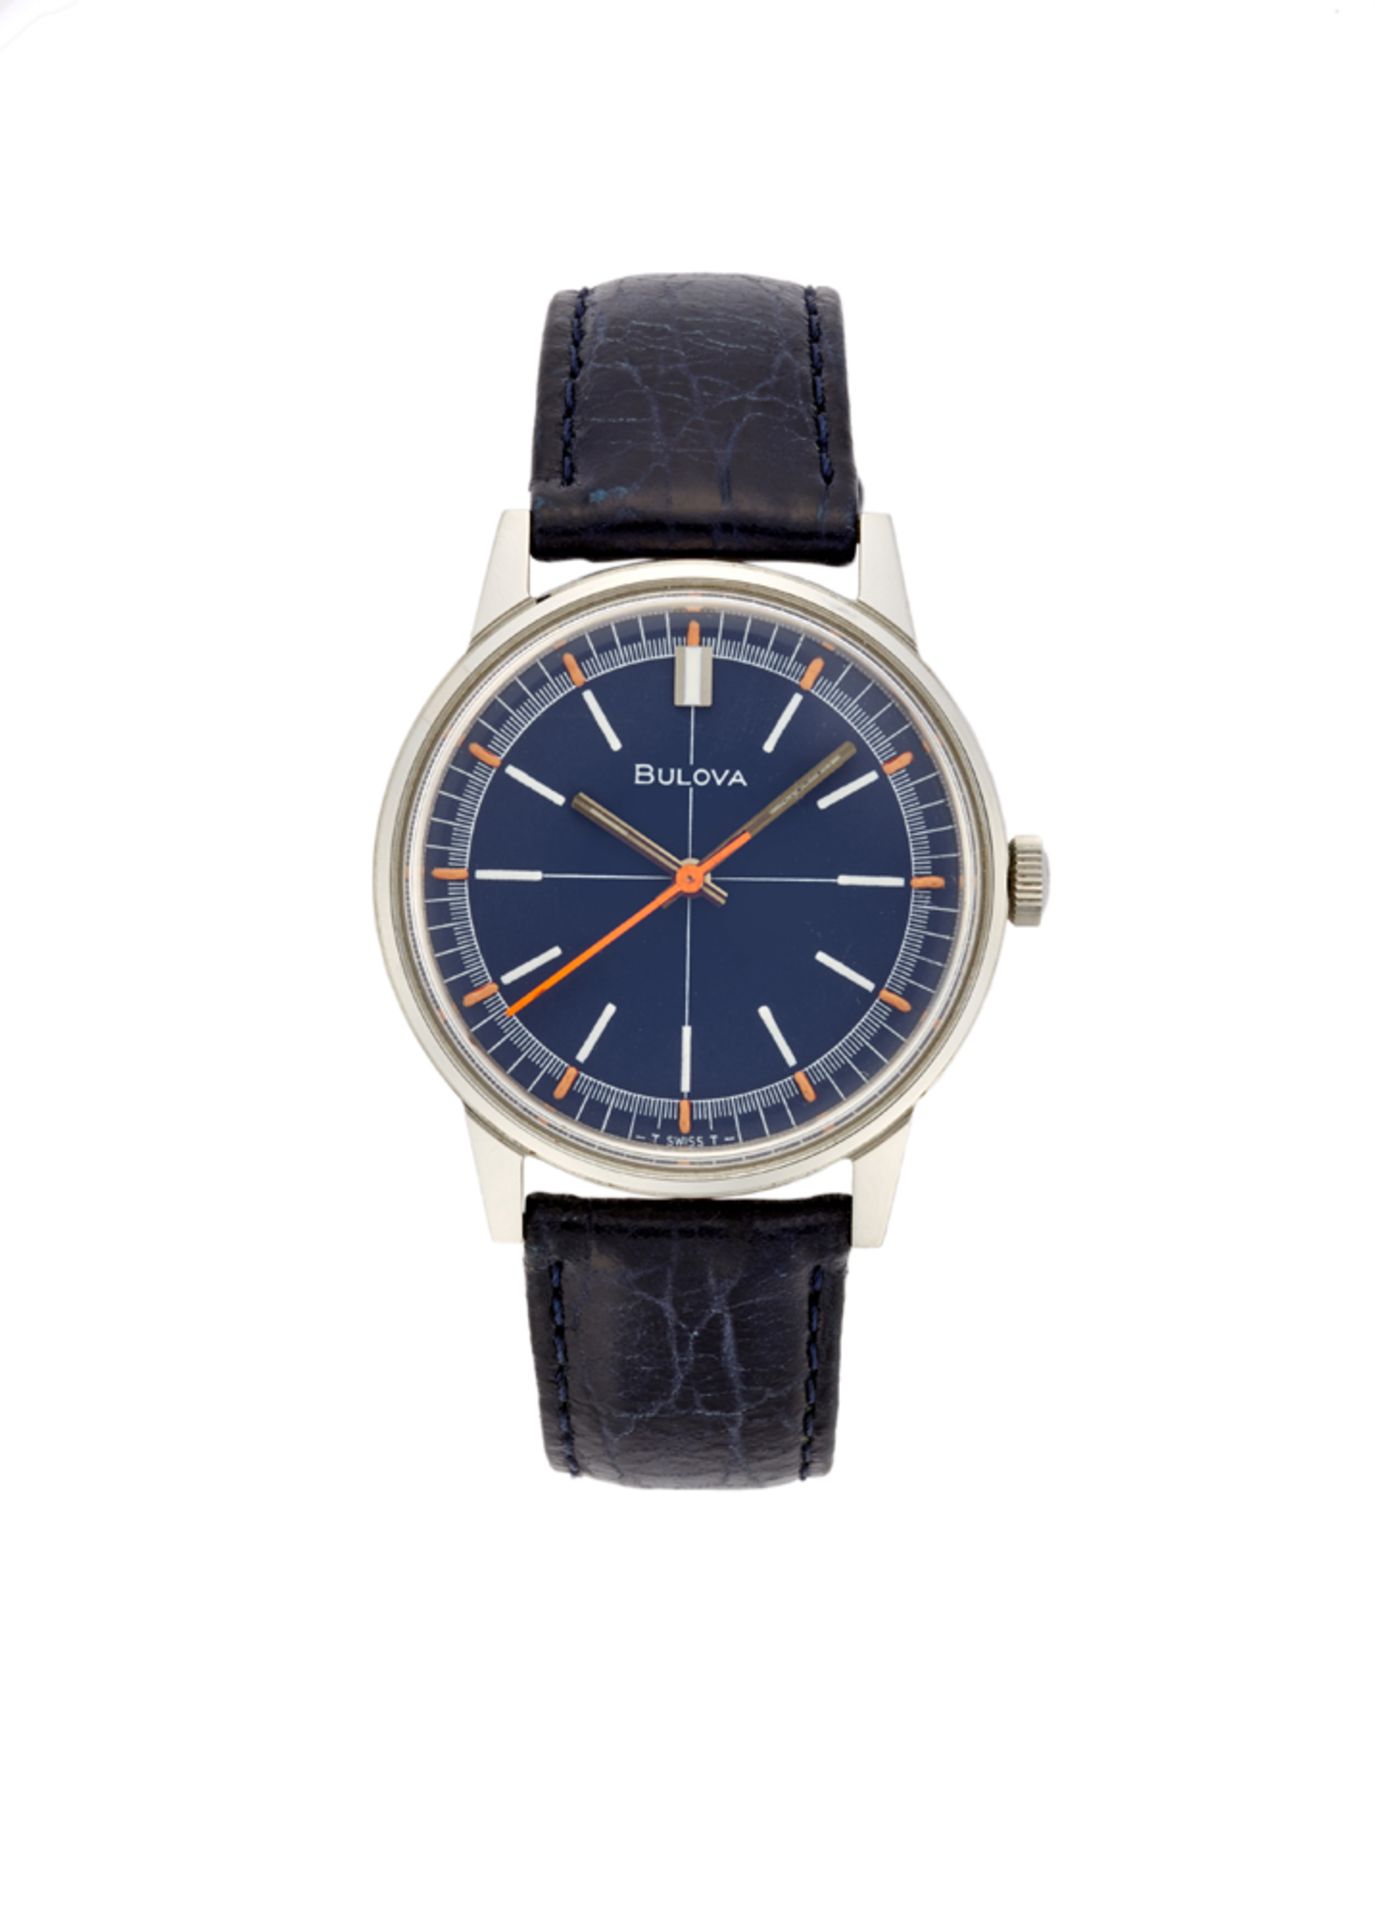 BULOVAGent's steel wristwatch1970sDial, movement and case signedAutomatic movementBlue dial with